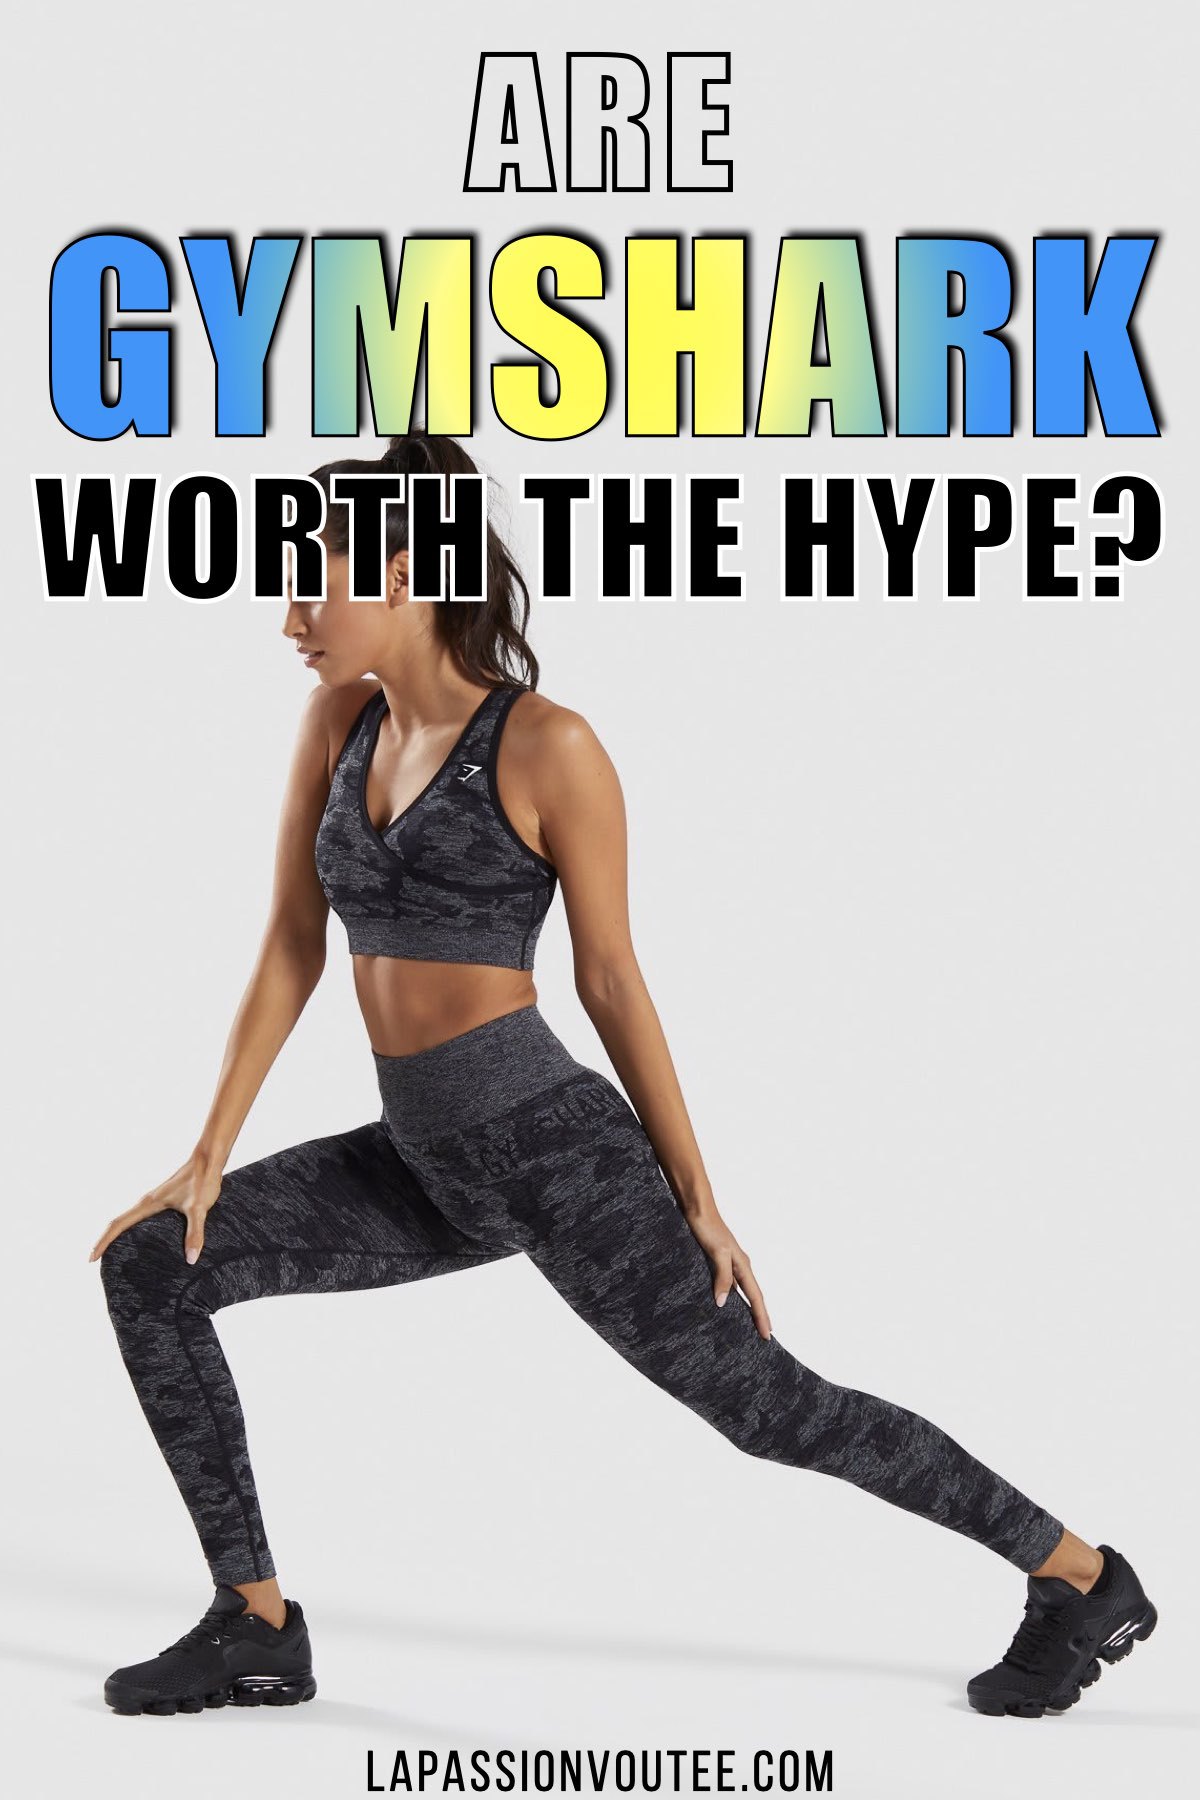 Are Gymshark leggings REALLY all that good? After much research, these are the best of the best Gymshark leggings ever. These athleisure yoga pants have the perfect amount of compression while enhancing the appearance of your bum. Discover the Gymshark Flex leggings, Cameo yoga pants, Fit leggings and many more. #gymsharkwomen #leggings